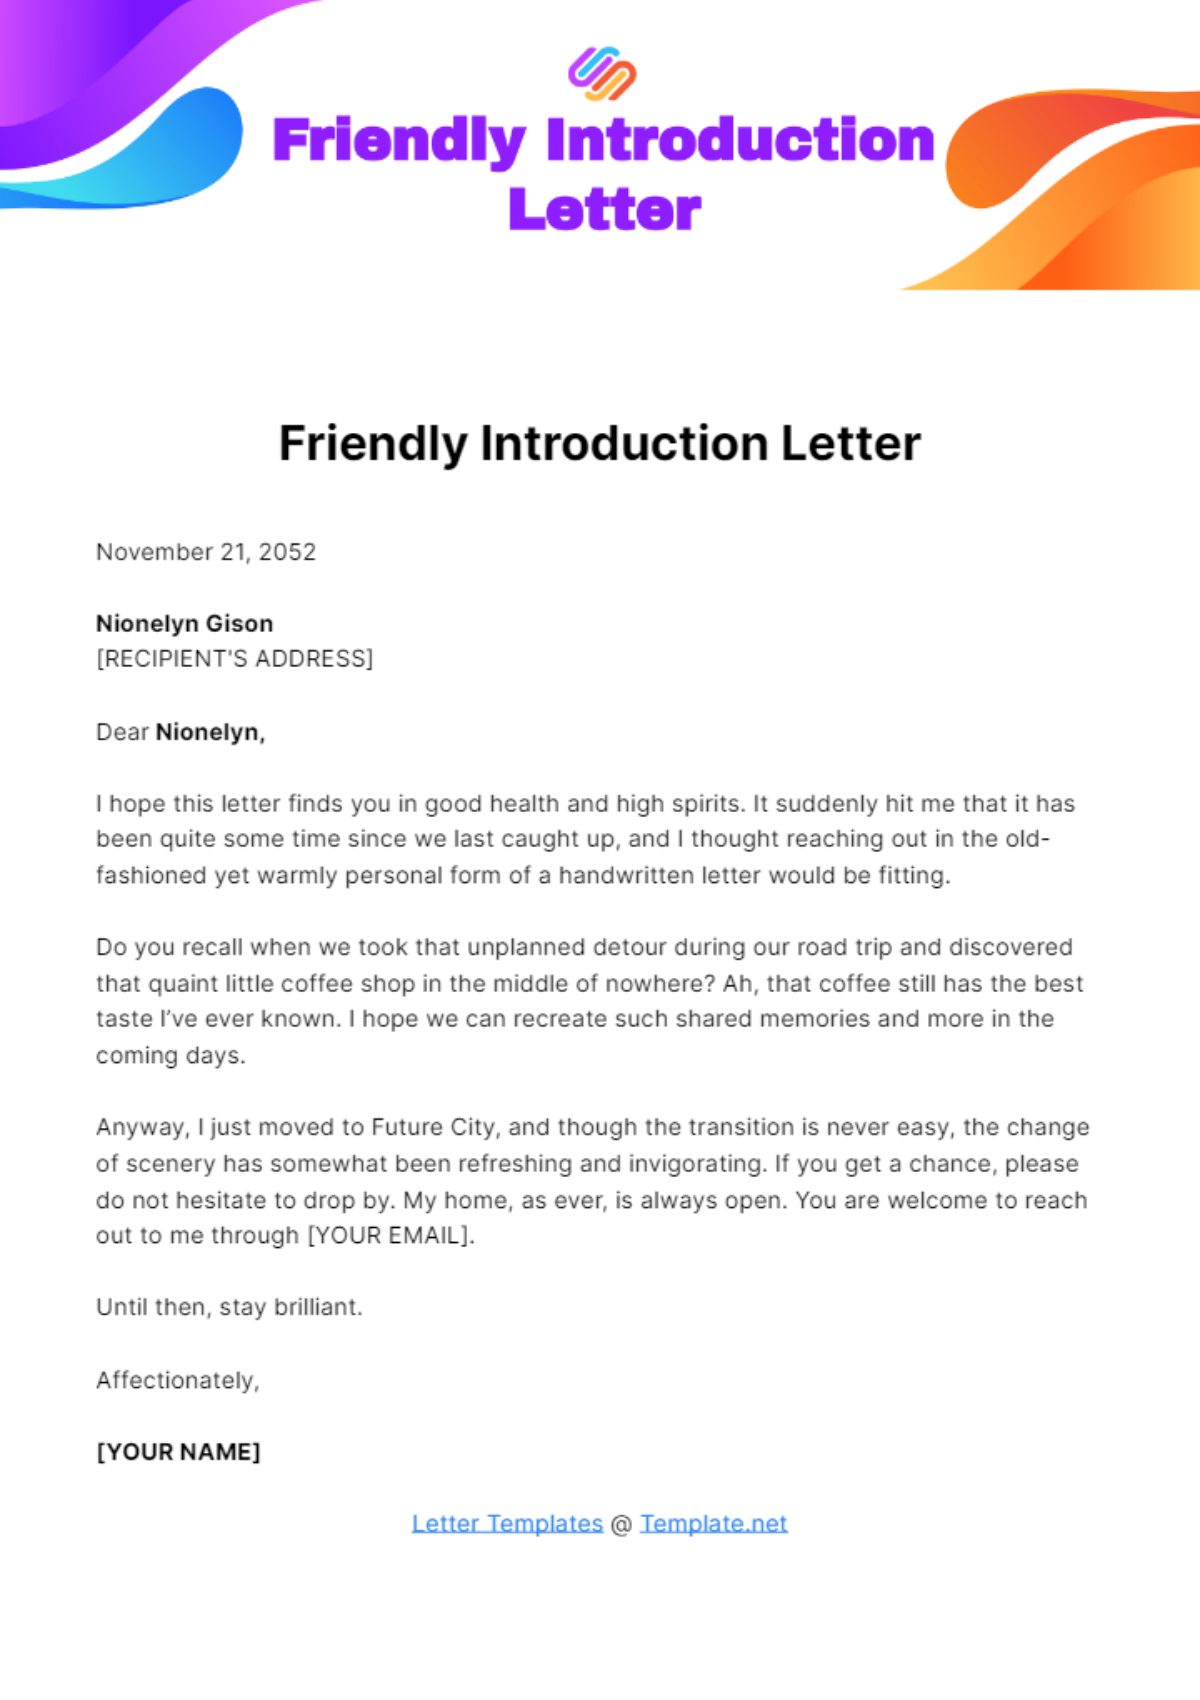 Free Friendly Introduction Letter Template